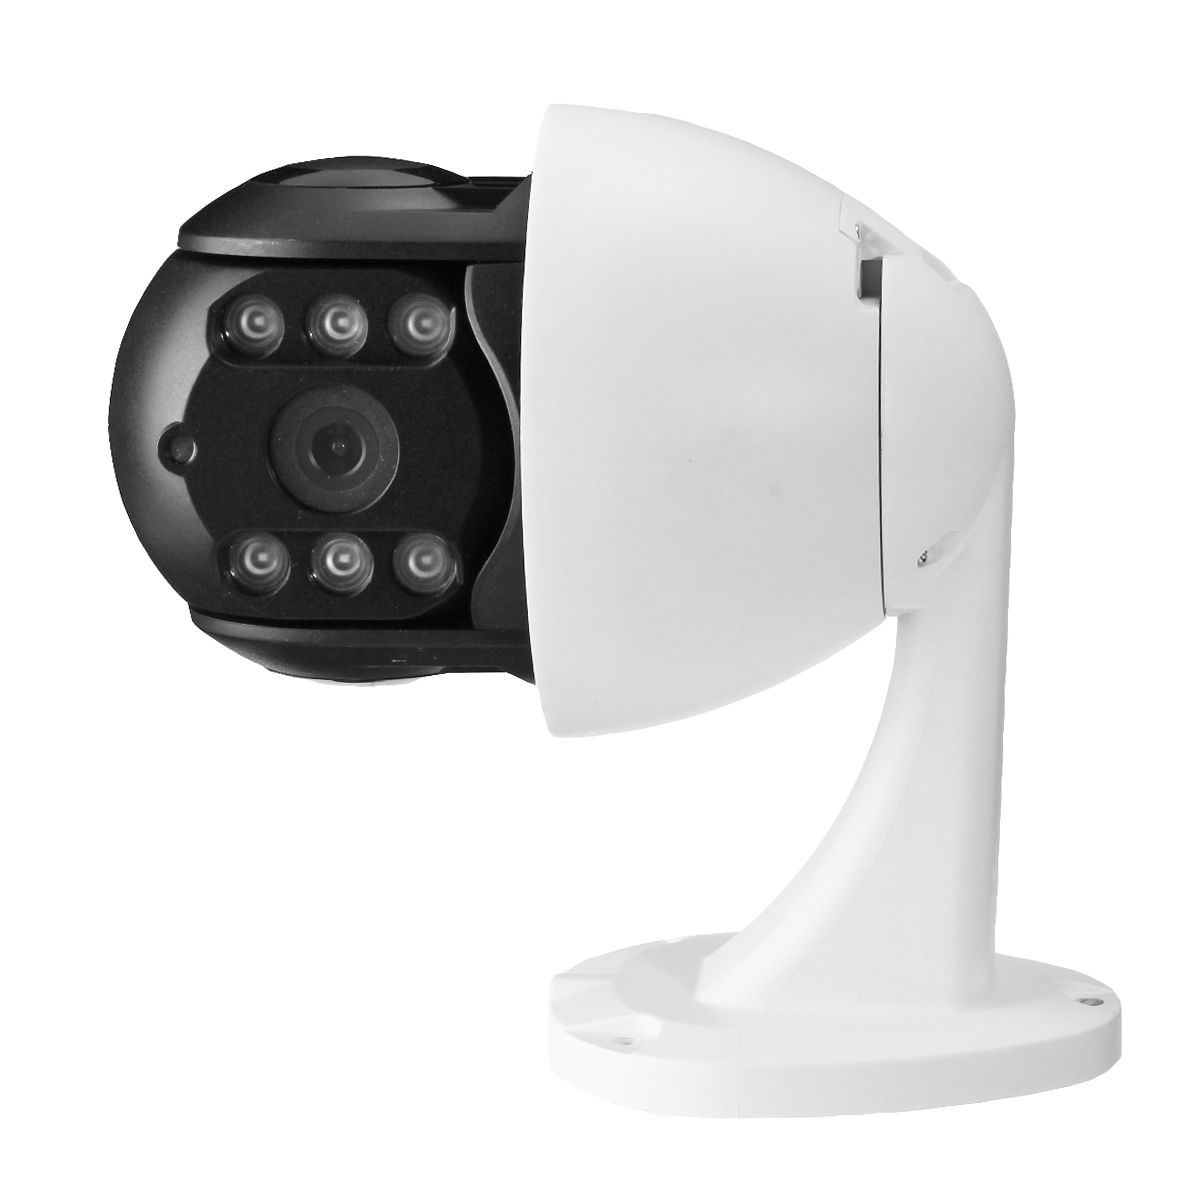 1080P-20MP-WiFi-Wireless-PTZ-Security-IP-Camera-Outdoor-Waterproof-Monitor-Night-Vision-1558555